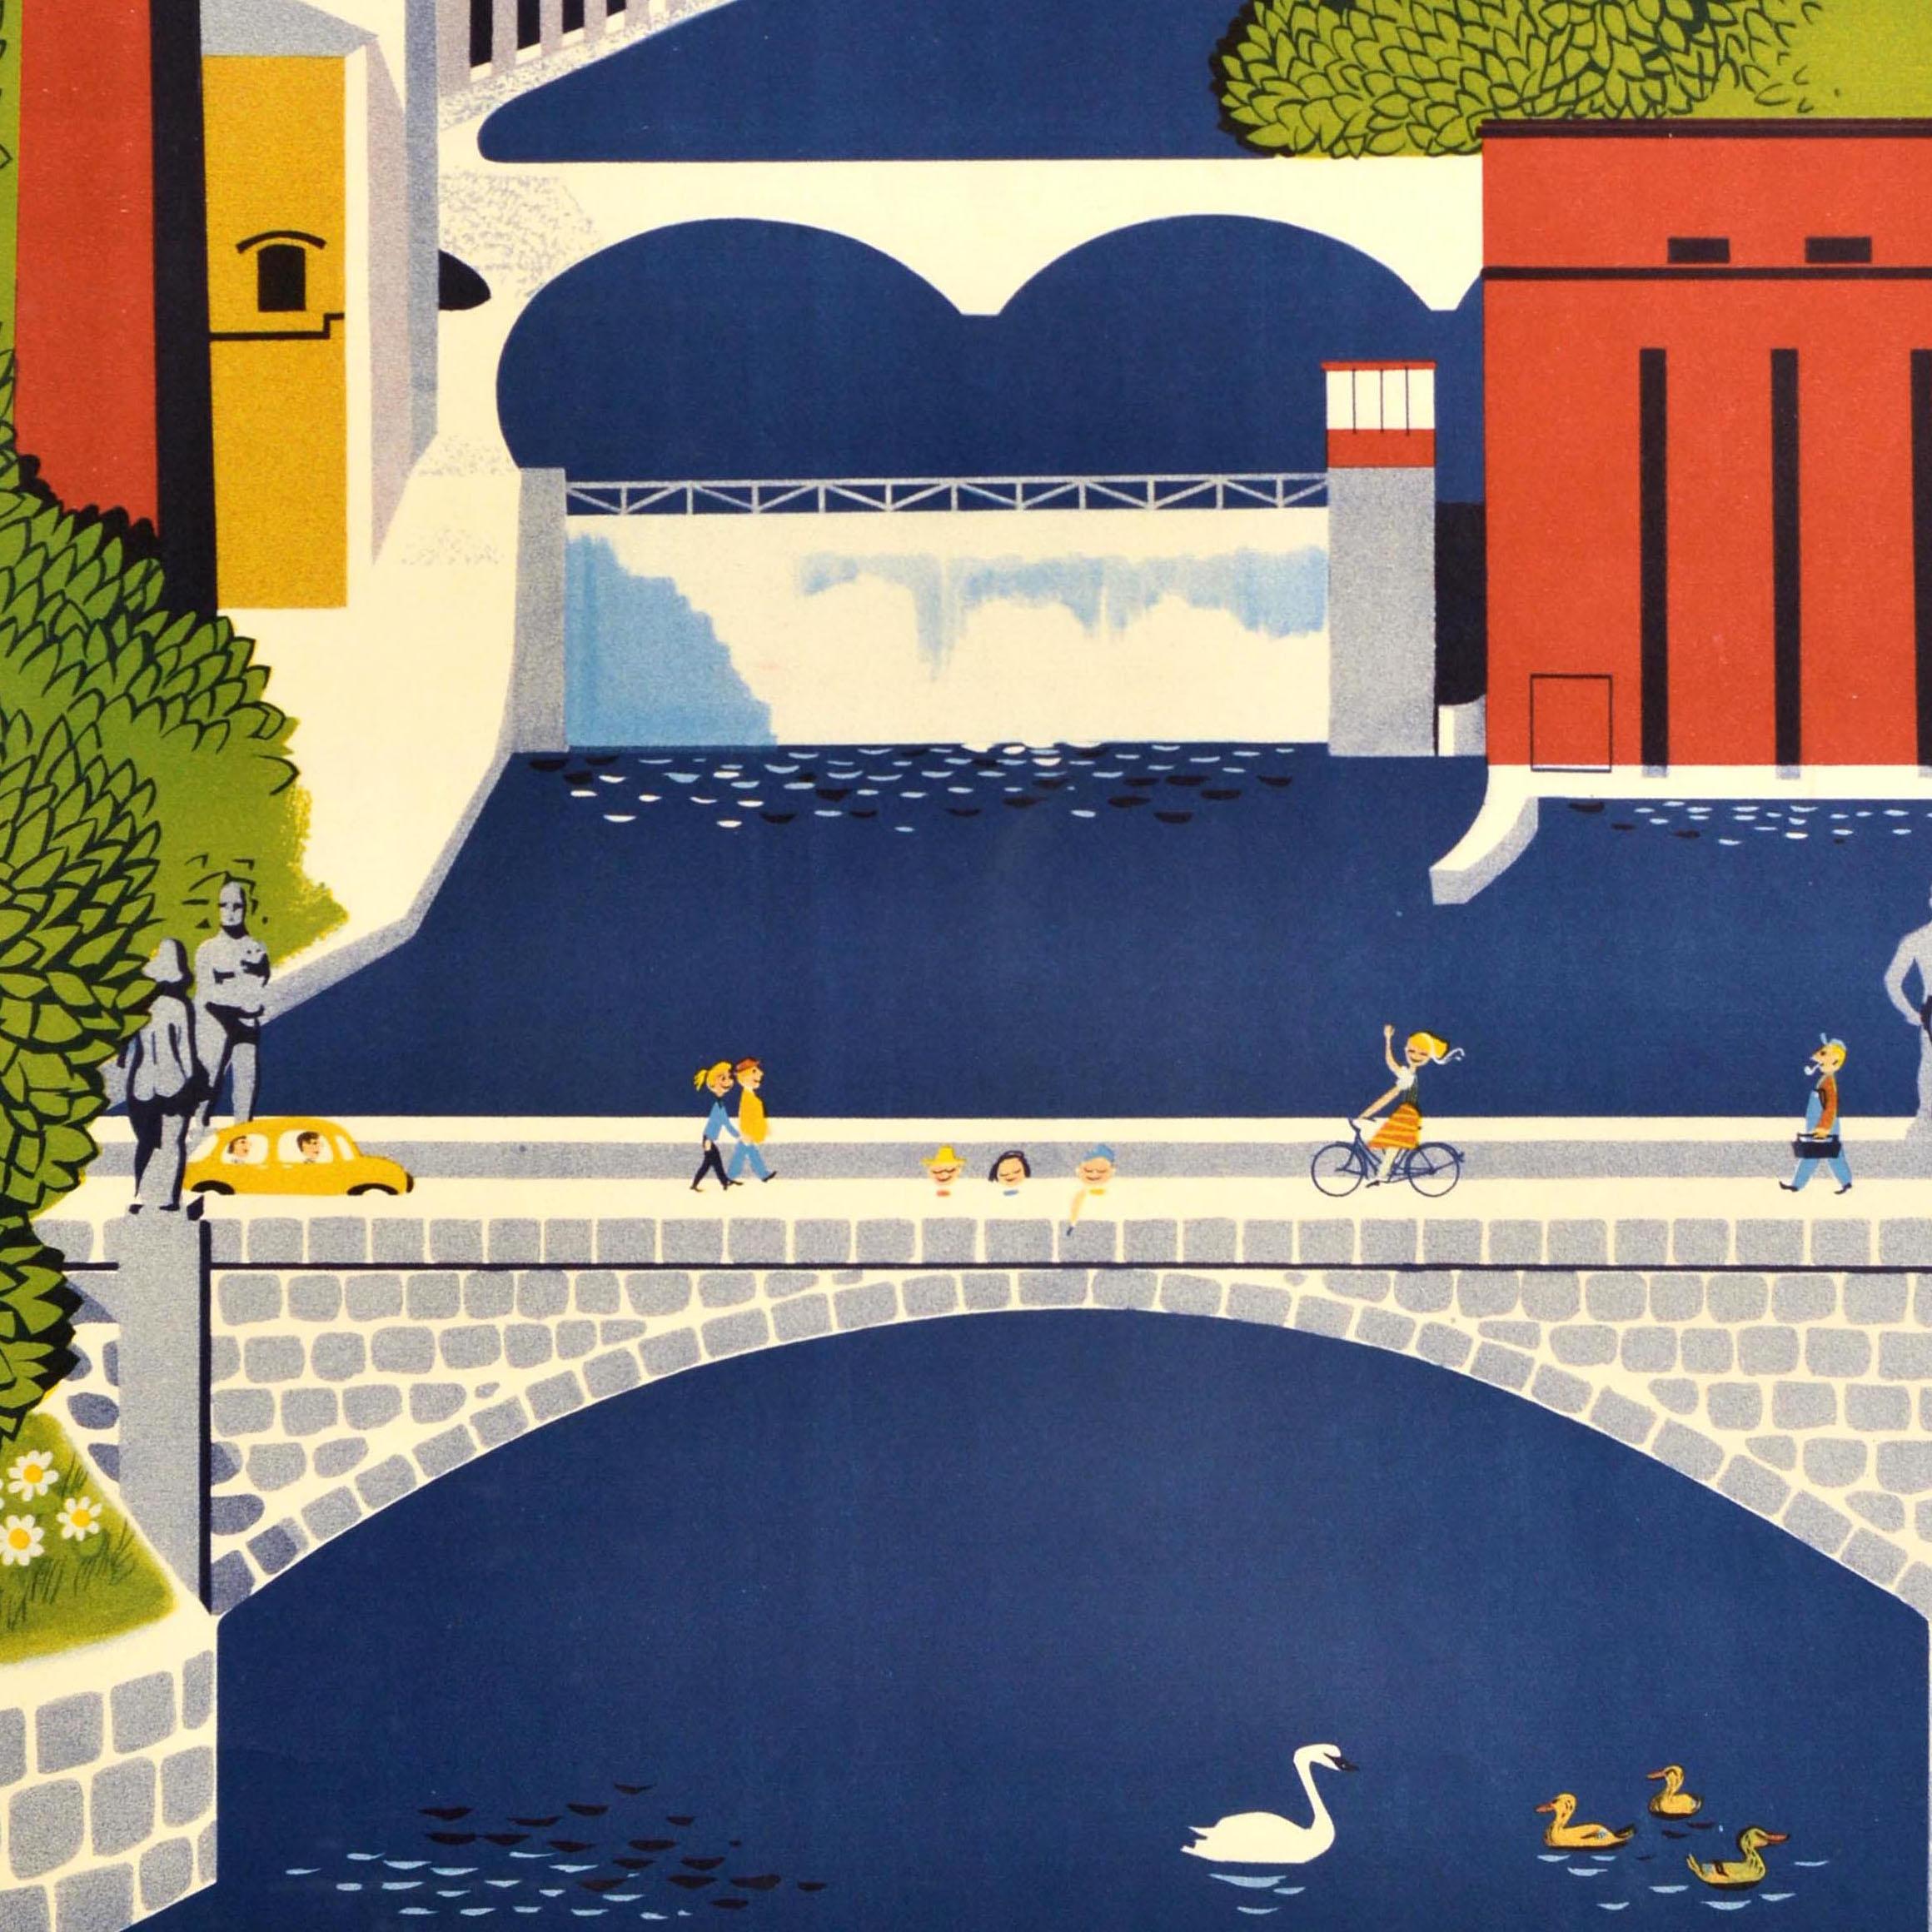 Original Vintage Travel Poster Tampere Finland Rolf Christianson Suomi Nordic For Sale 1